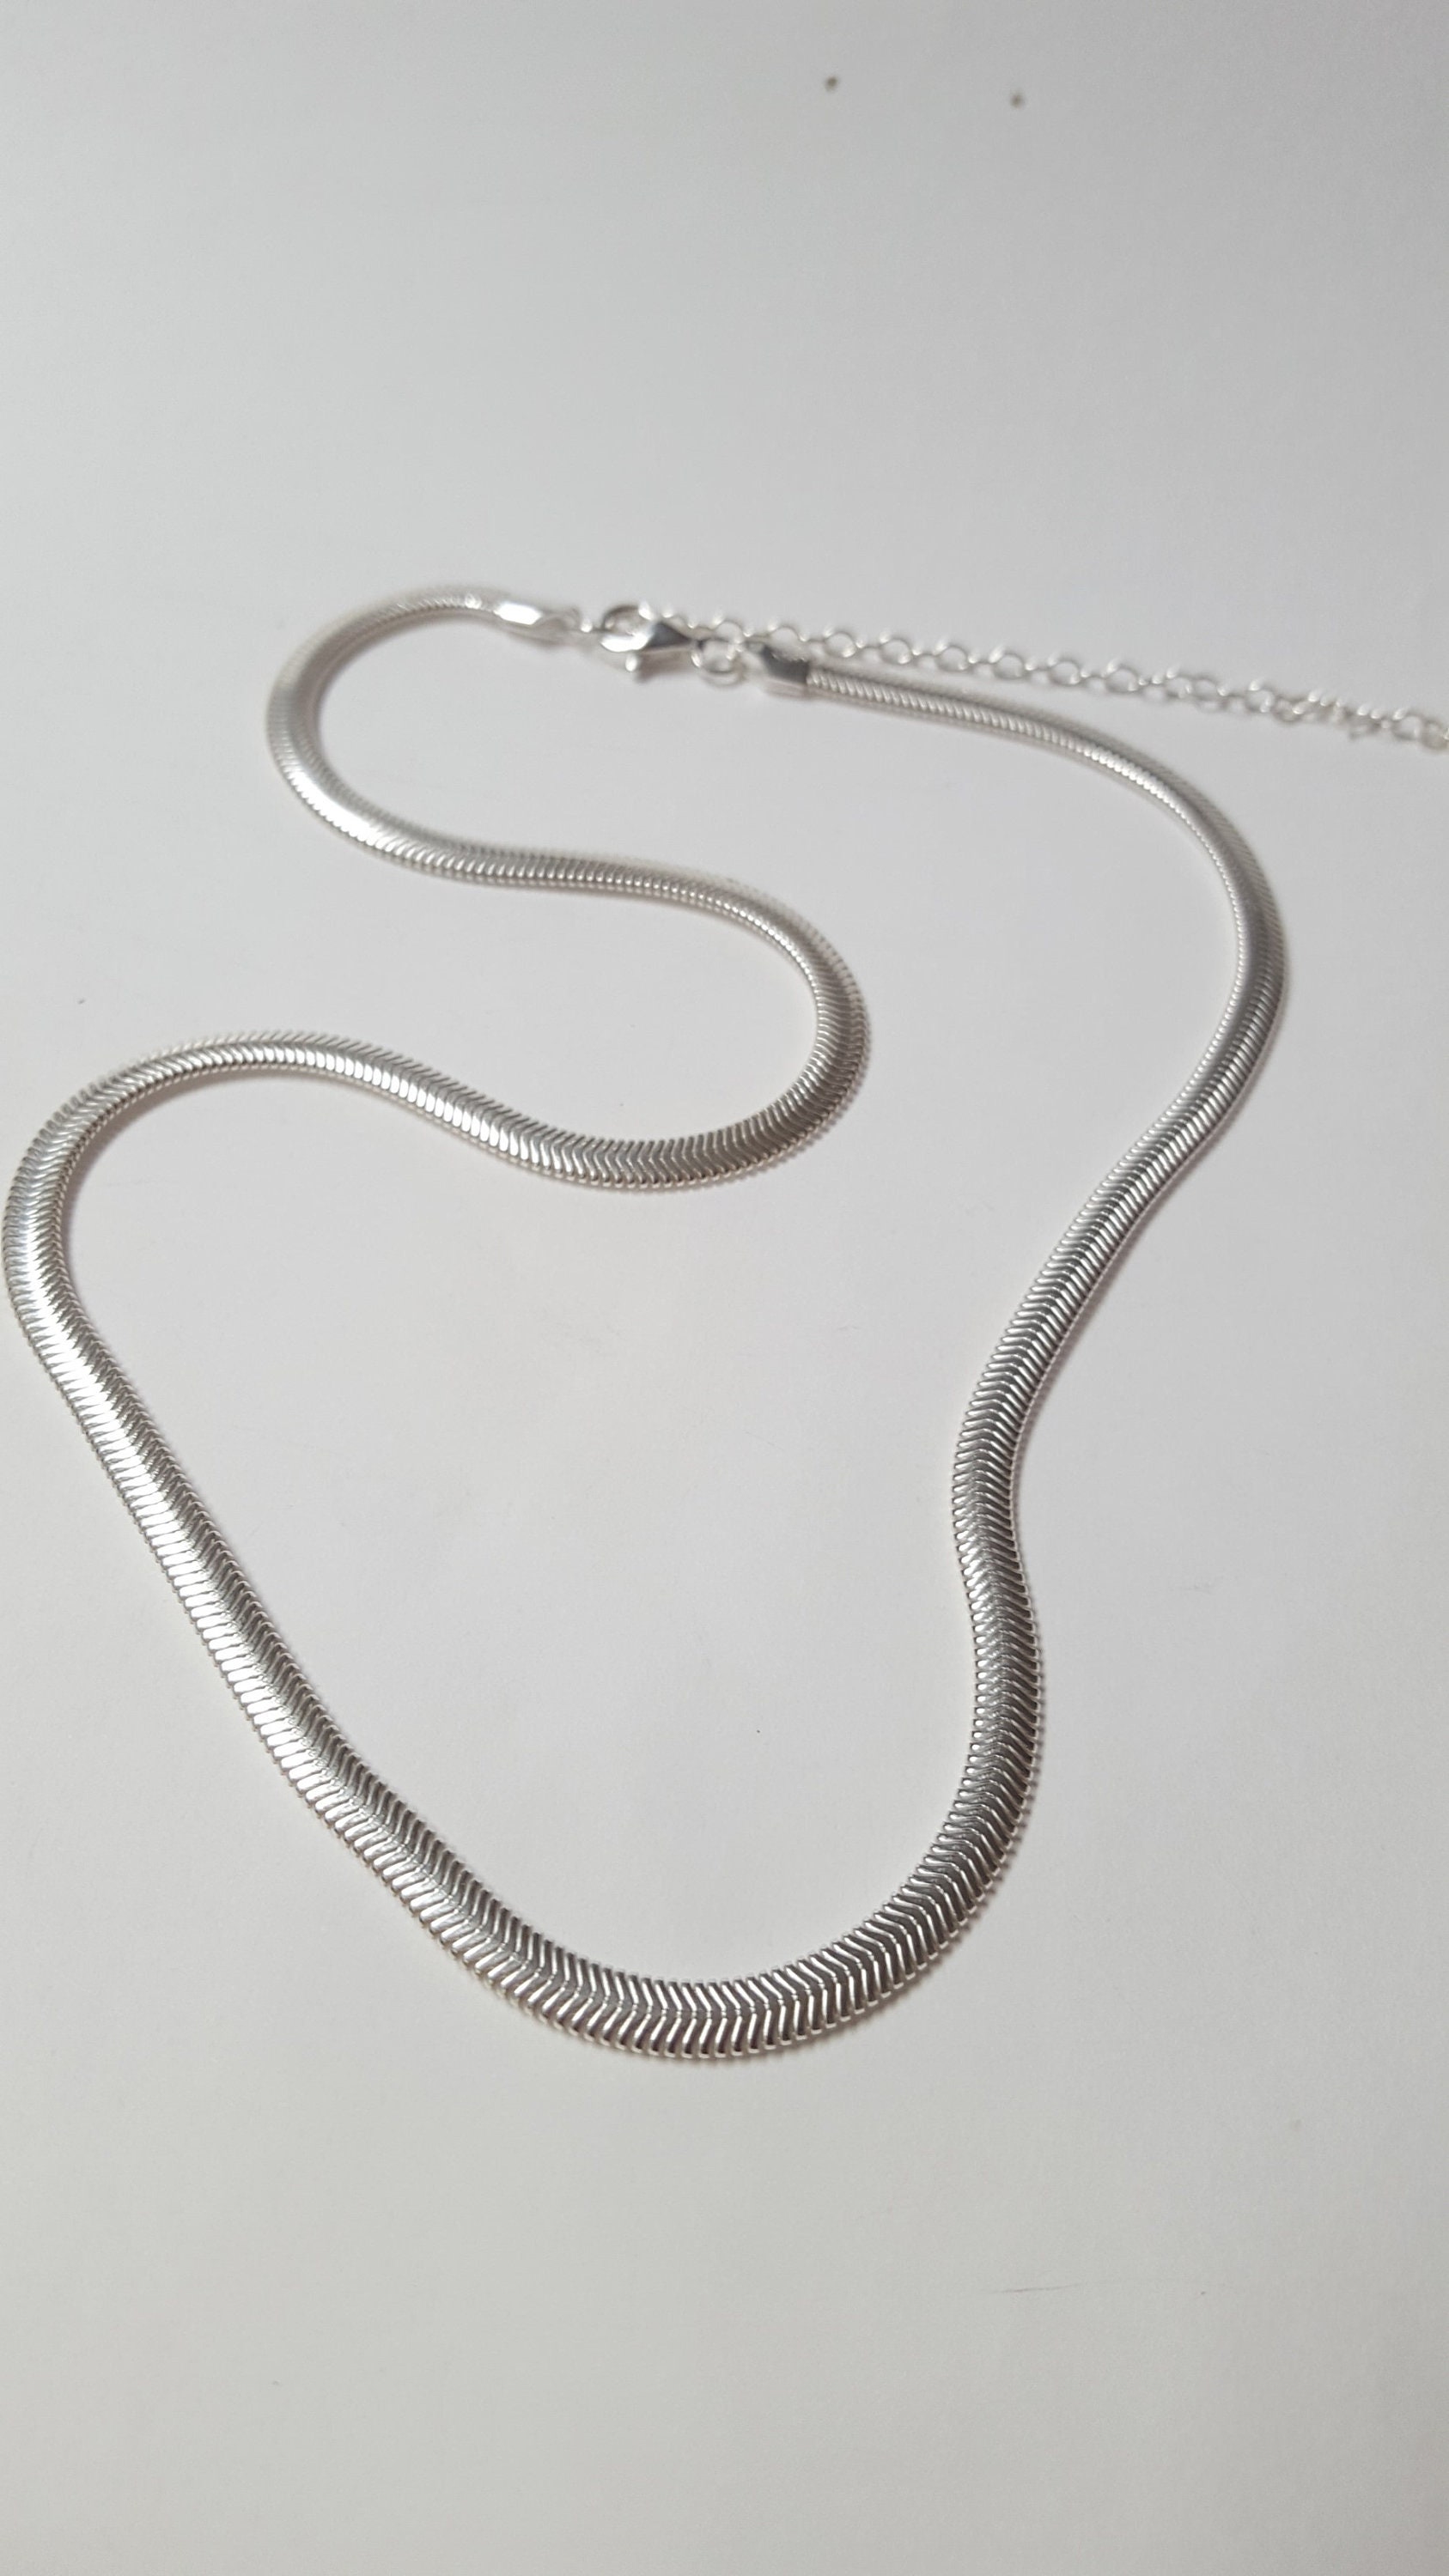 Snake Necklace, Sterling Silver Snake Chain Necklace, Flat Snake Chain, Flat Snake Silver Choker